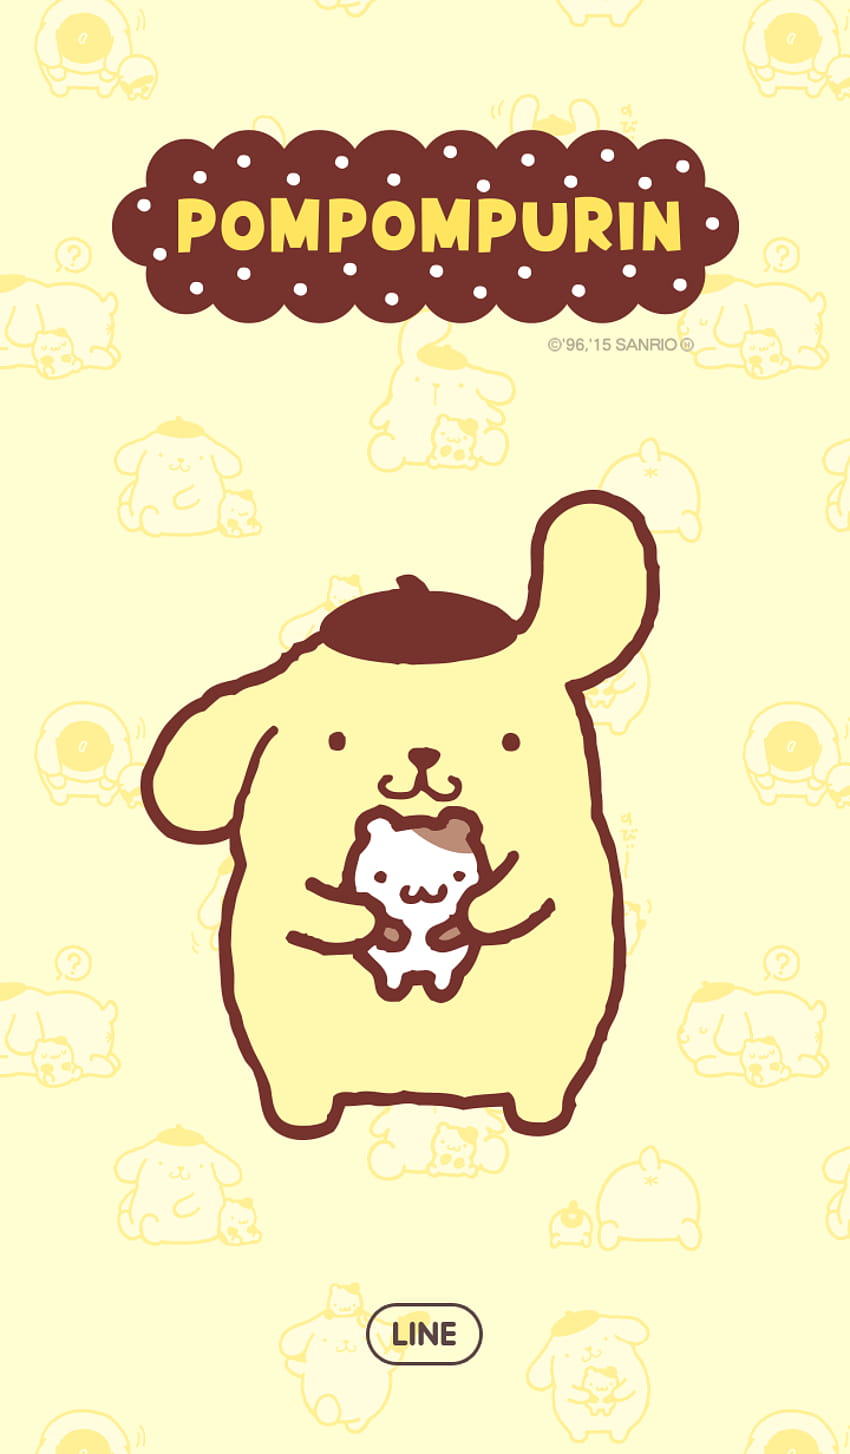 Pompompurin discovered by Naty HD phone wallpaper